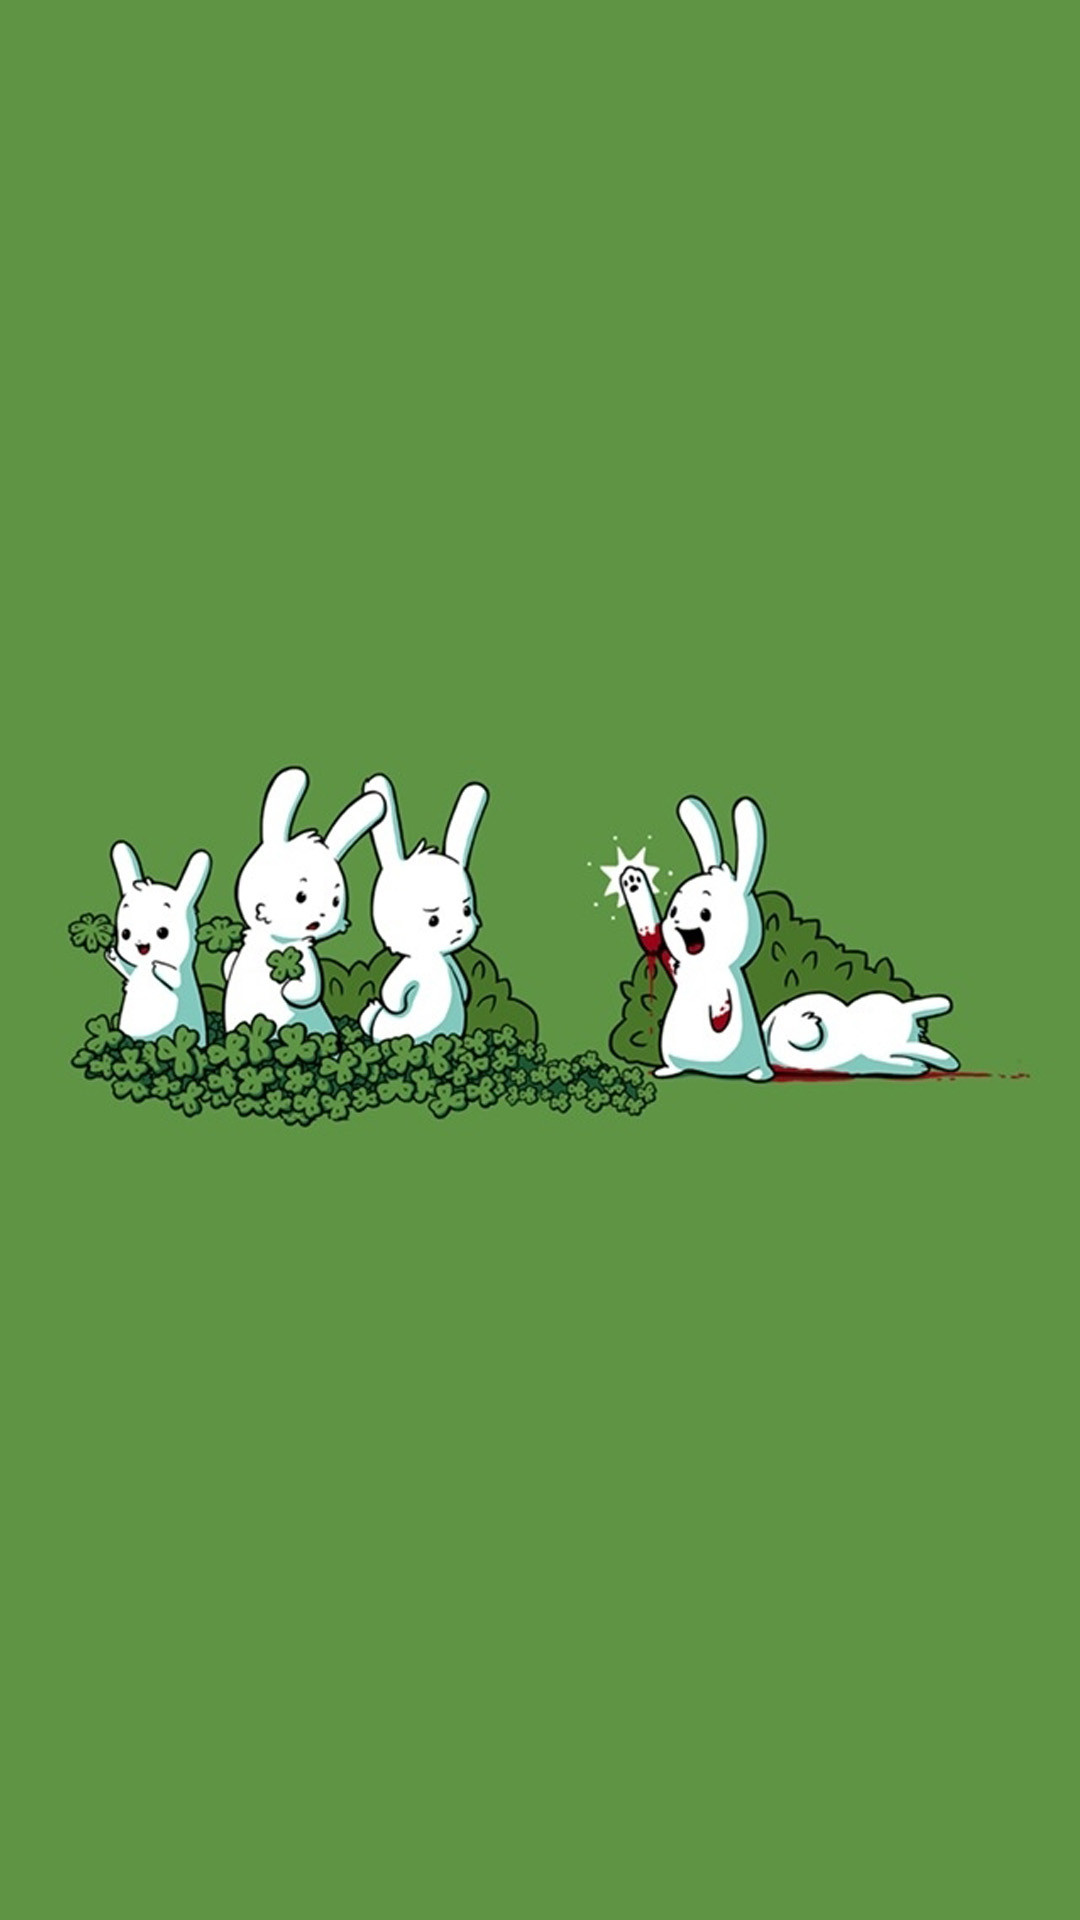 funny iphone wallpapers,green,rabbit,rabbits and hares,hare,illustration